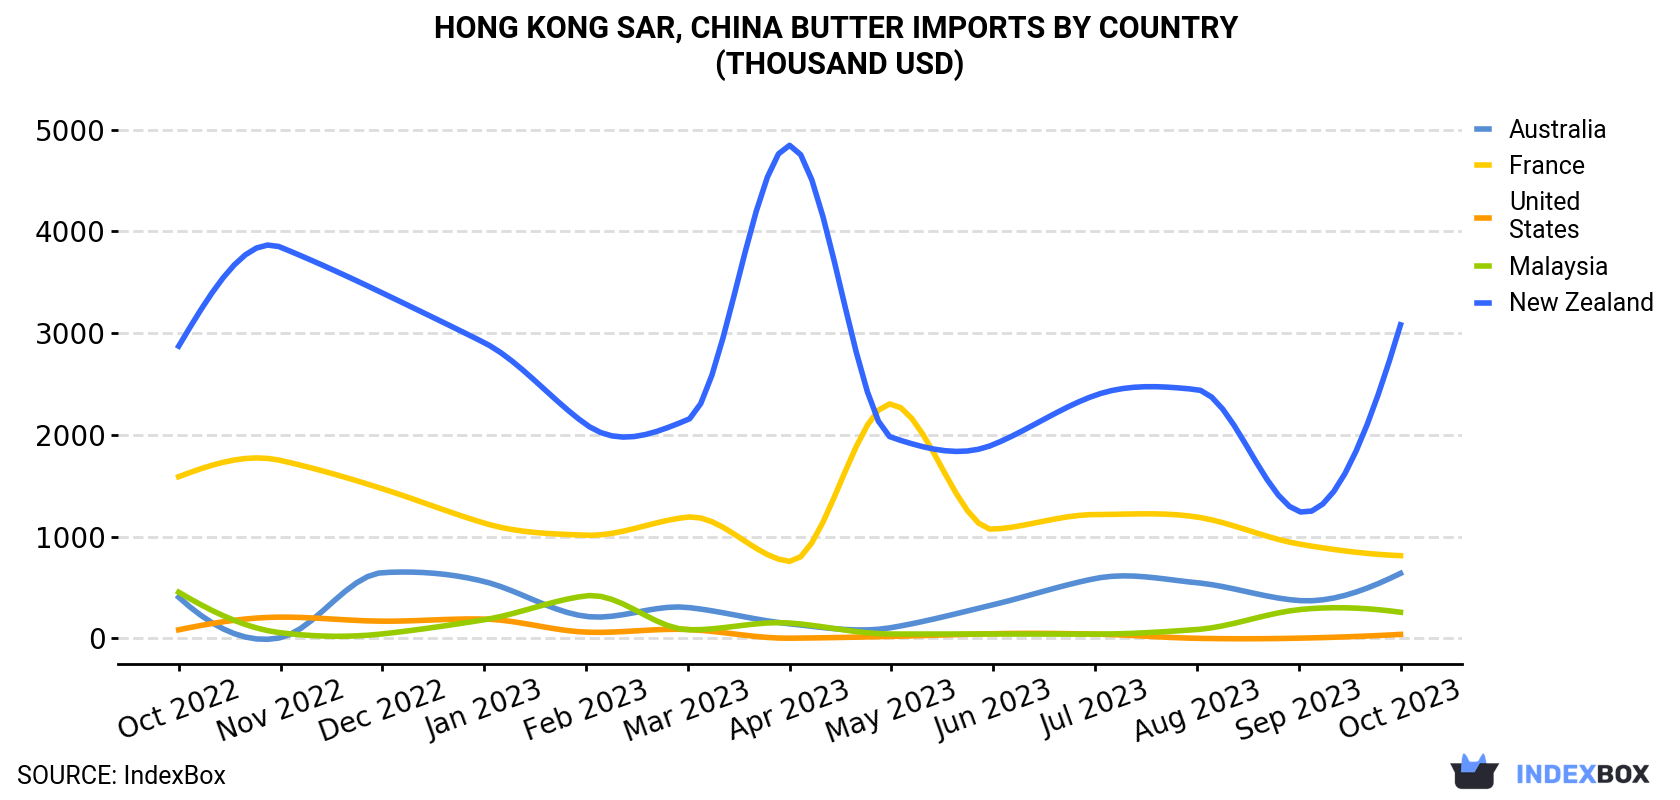 Hong Kong Butter Imports By Country (Thousand USD)